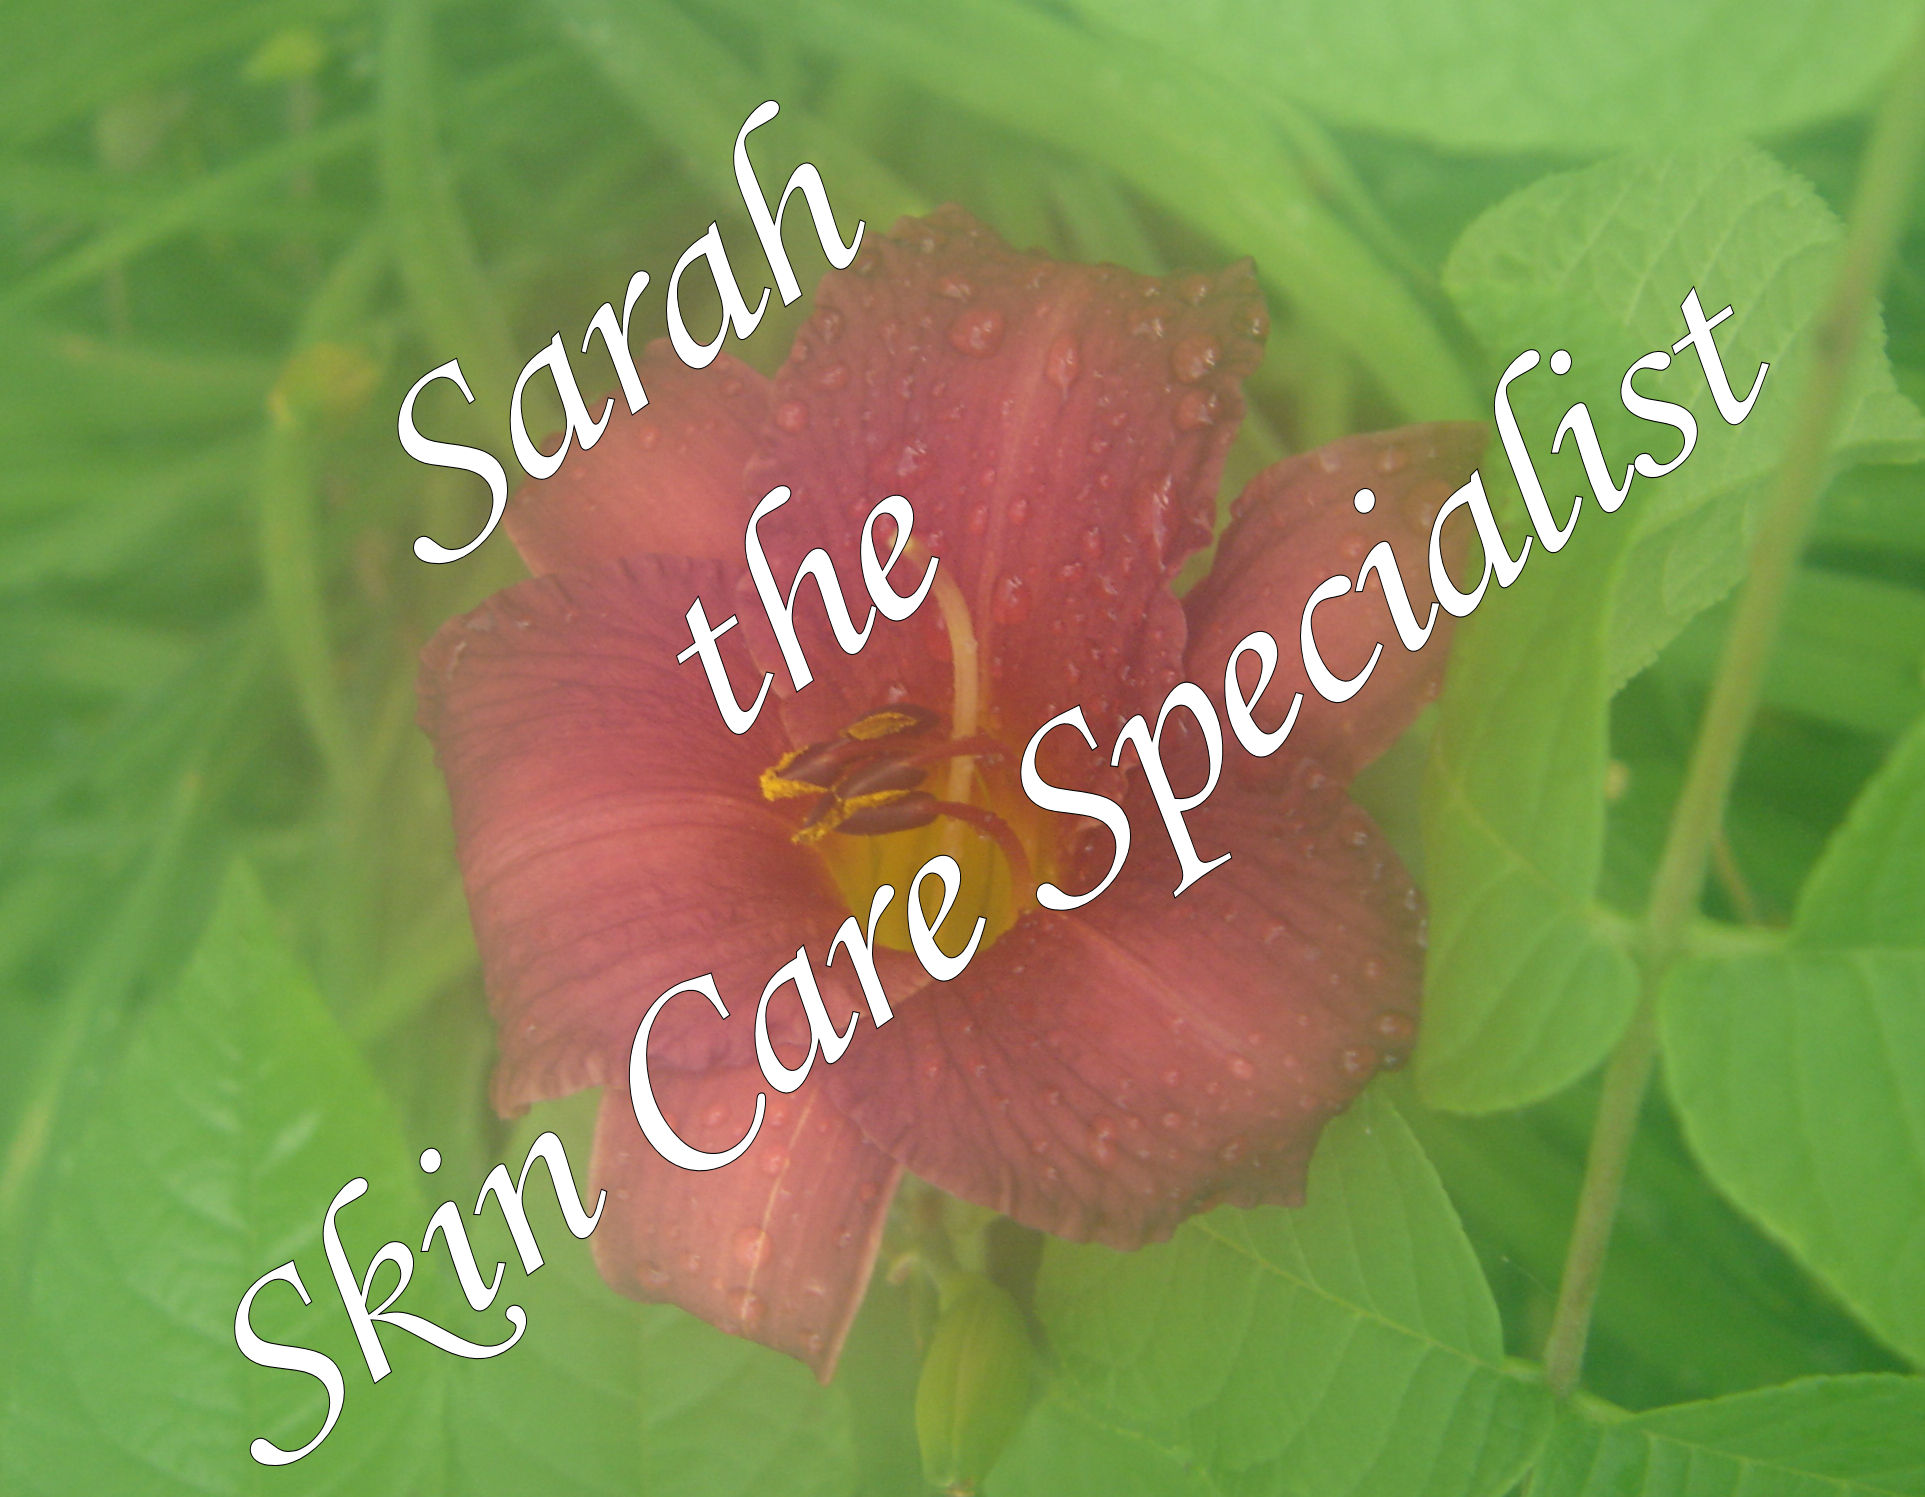 Sarah the Skin Care Specialist